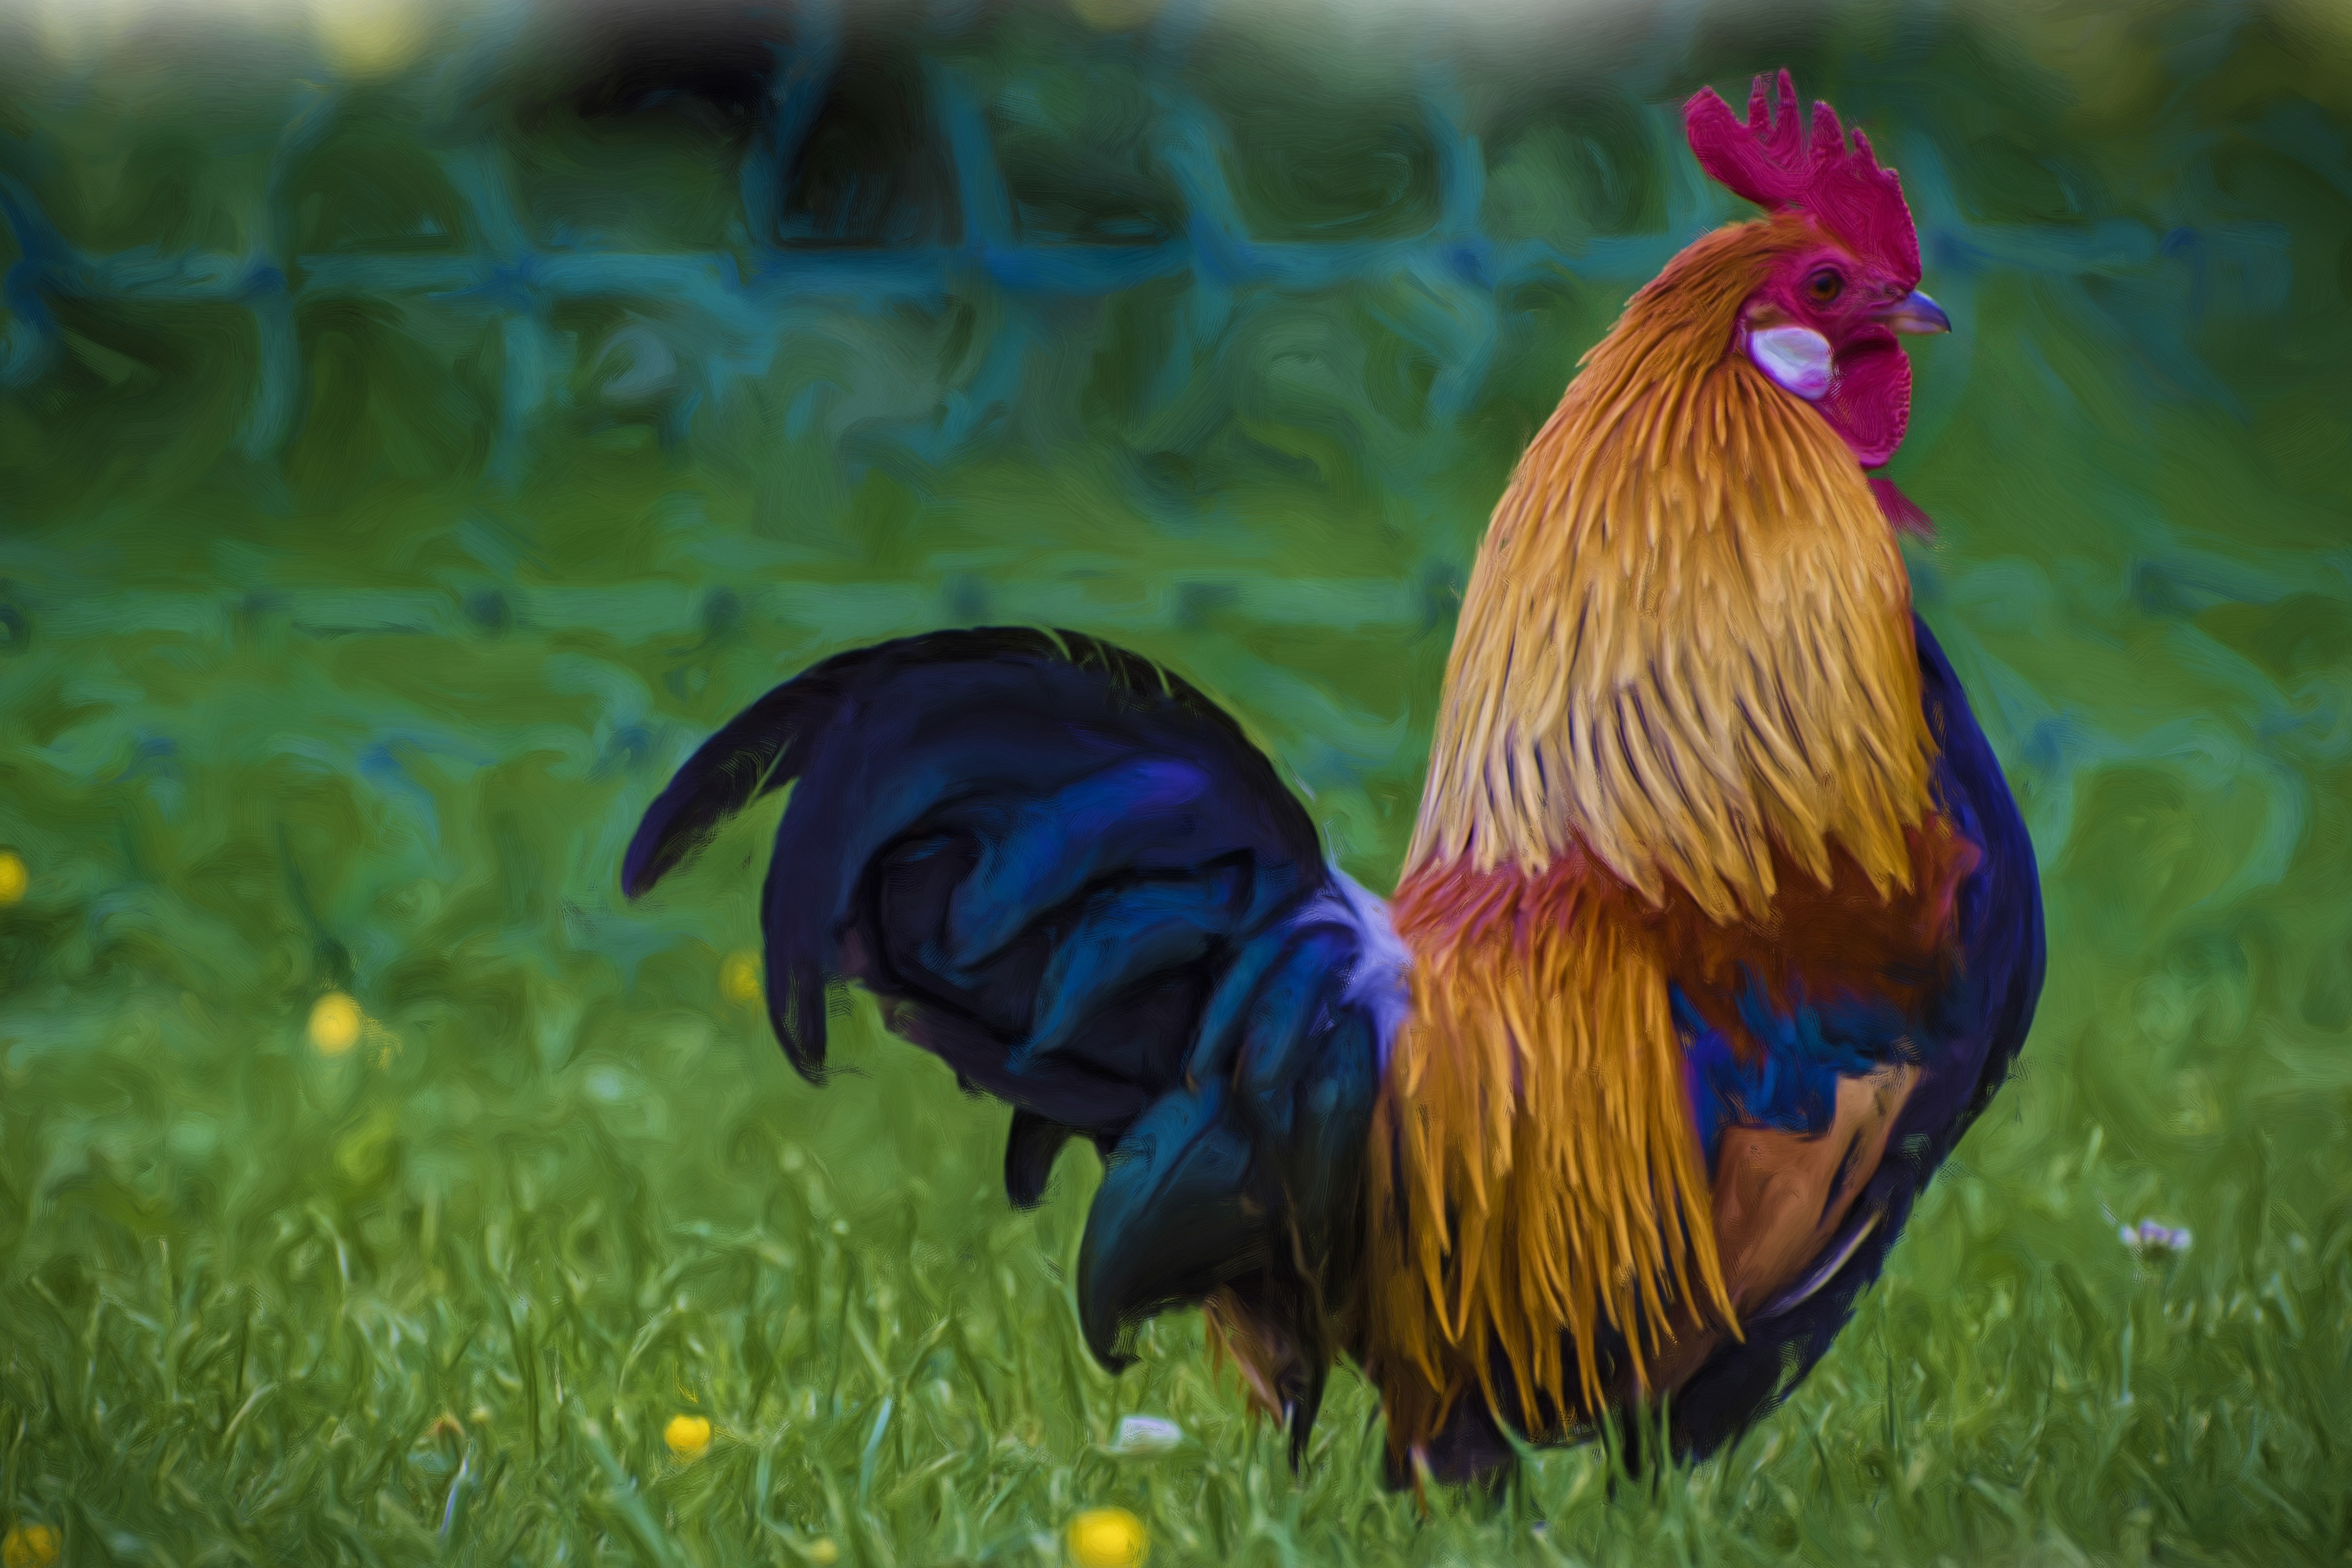 A rooster done with an oil pain filter by Hans Benn